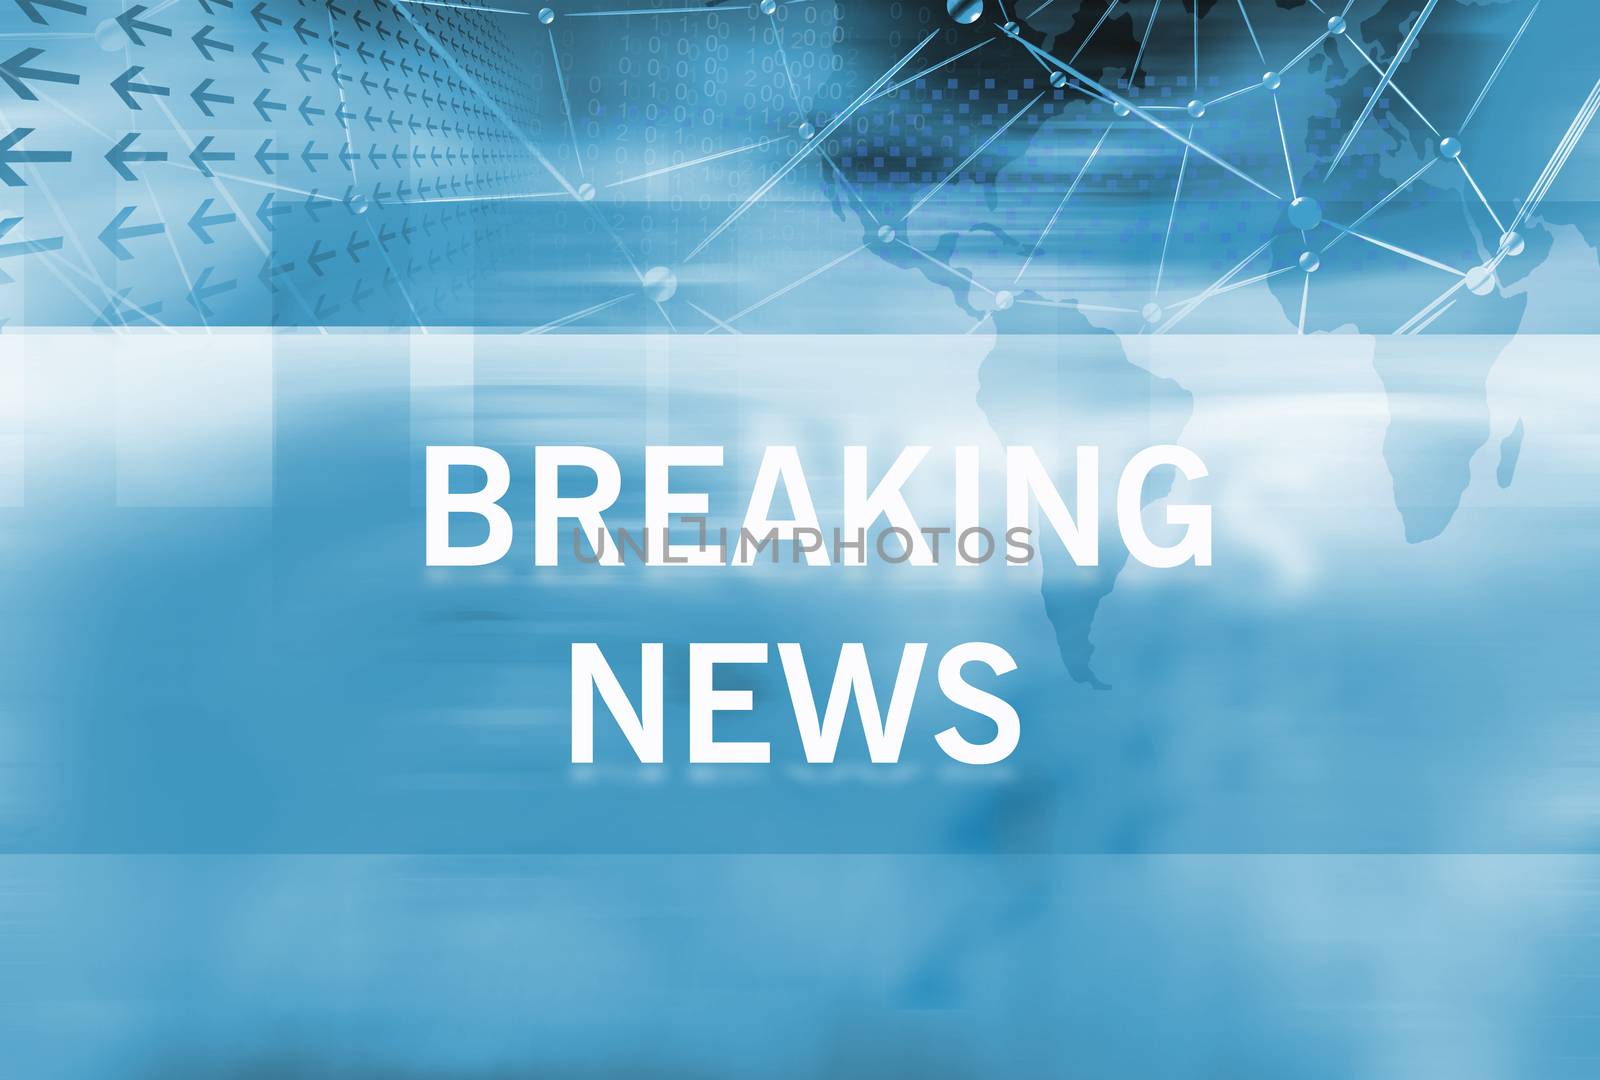 Graphical Breaking News Background with news text, Blue Theme Background with White Breaking News Text.